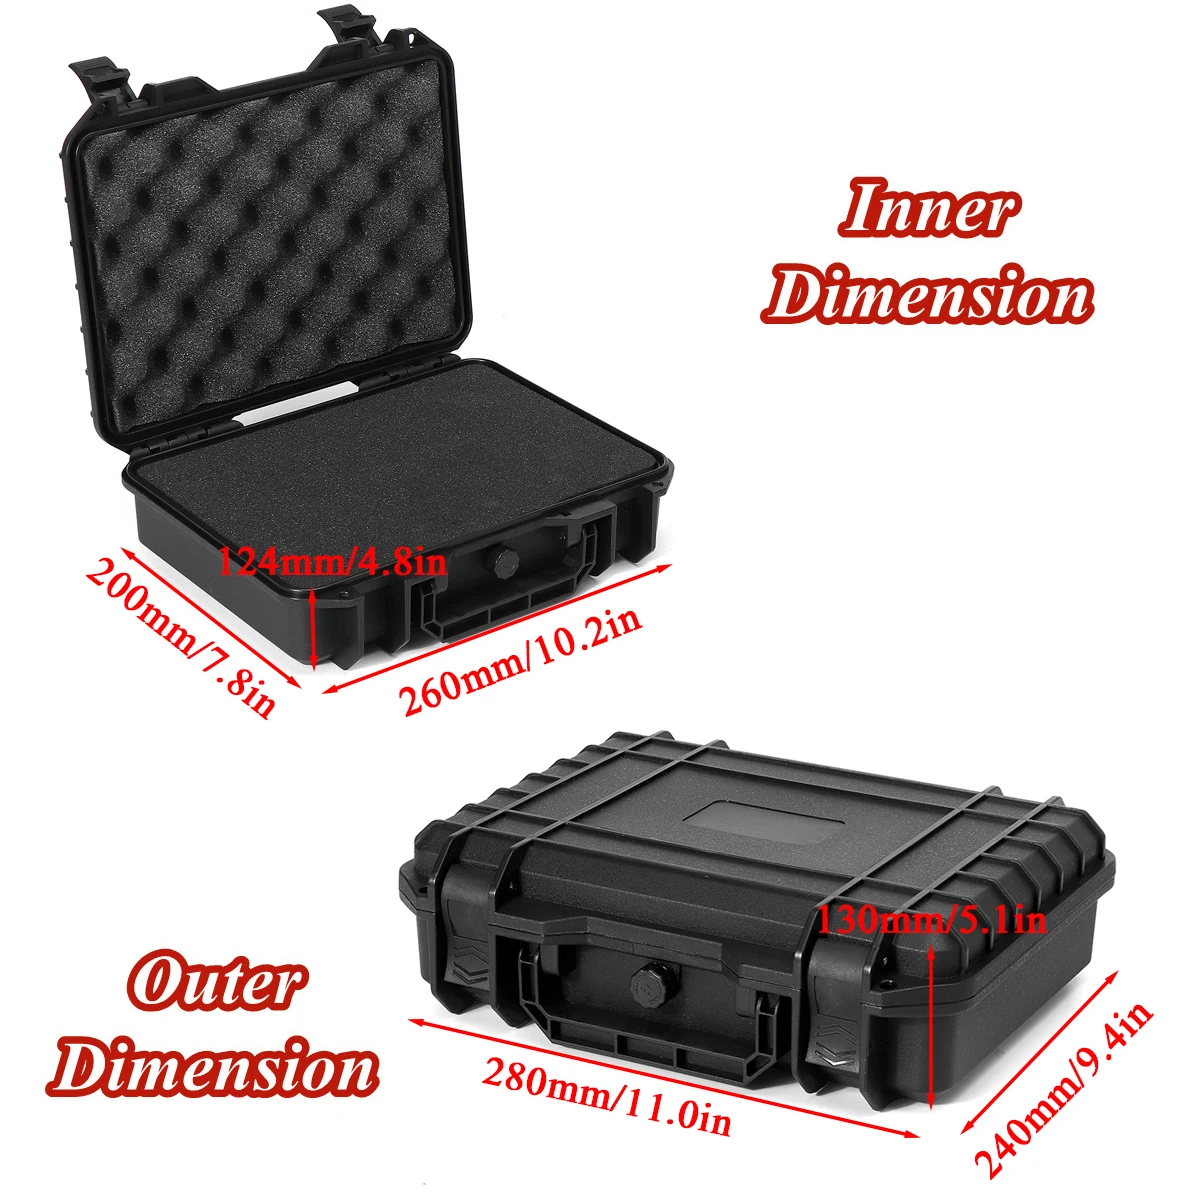 5 Sizes Waterproof Hard Carry Case Bag Tool Case Kits Box with Sponge St... - $90.05